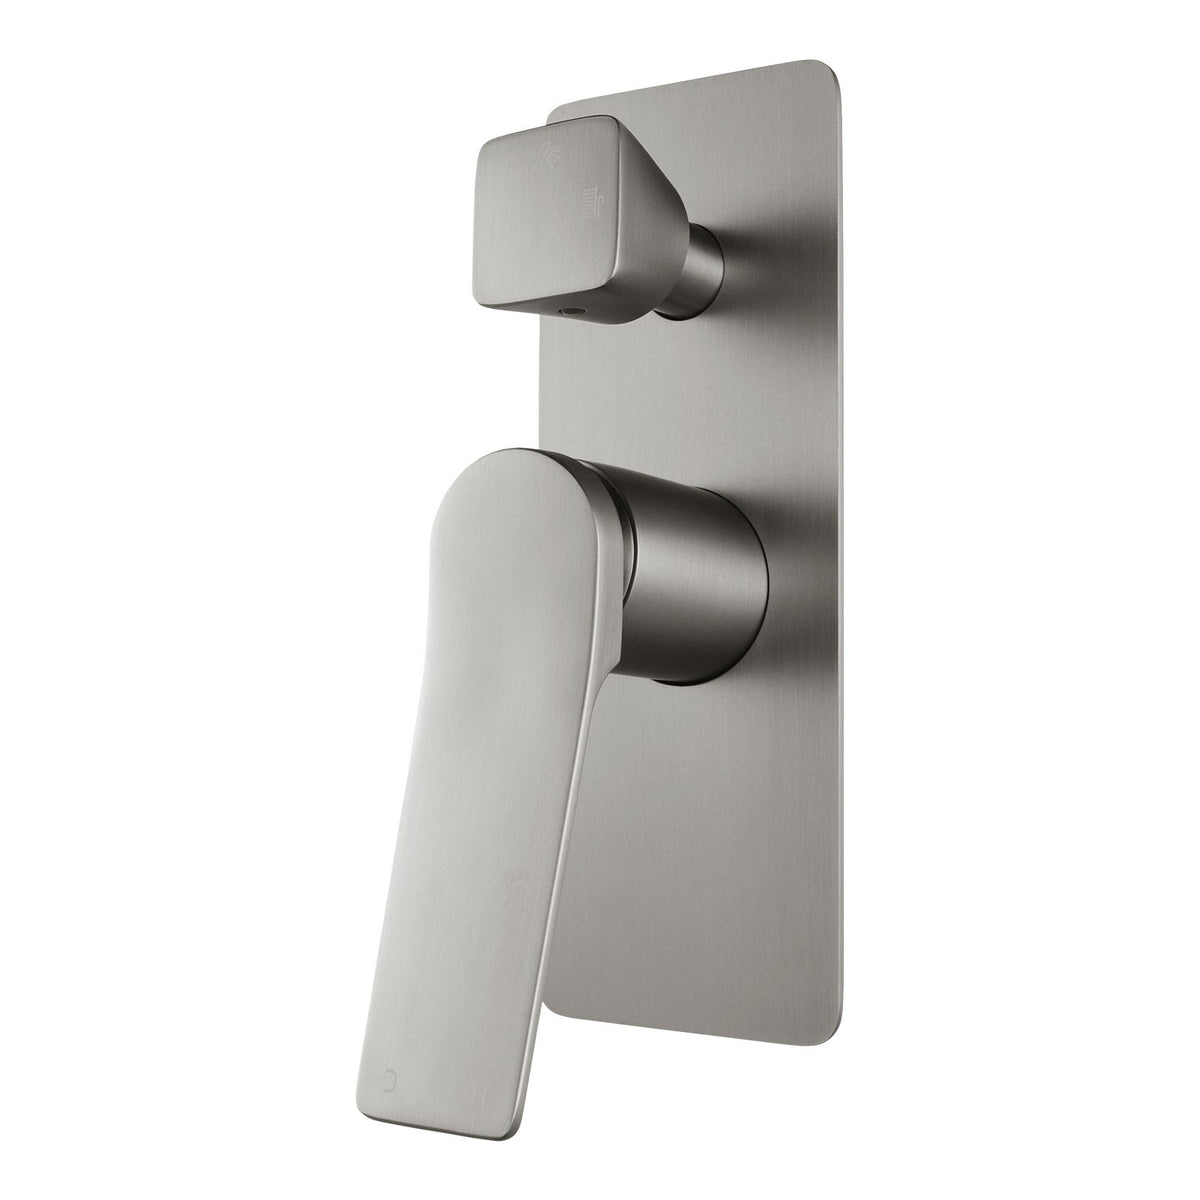 RUSHY Square Brushed Nickel Wall Mixer With Diverter